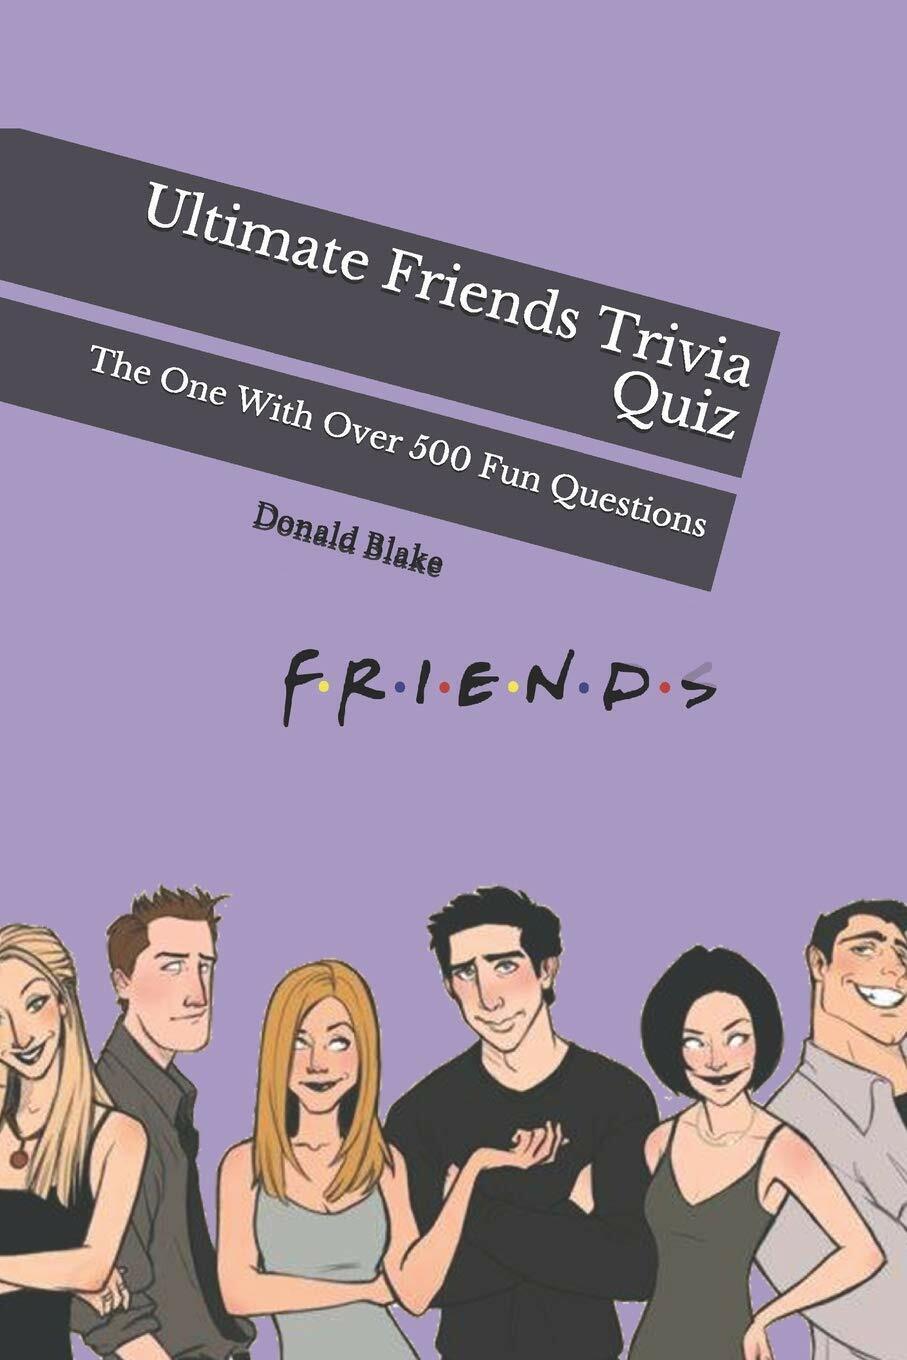 Ultimate Friends Trivia Quiz The One With Over 500 Fun Questions di Donald Blake